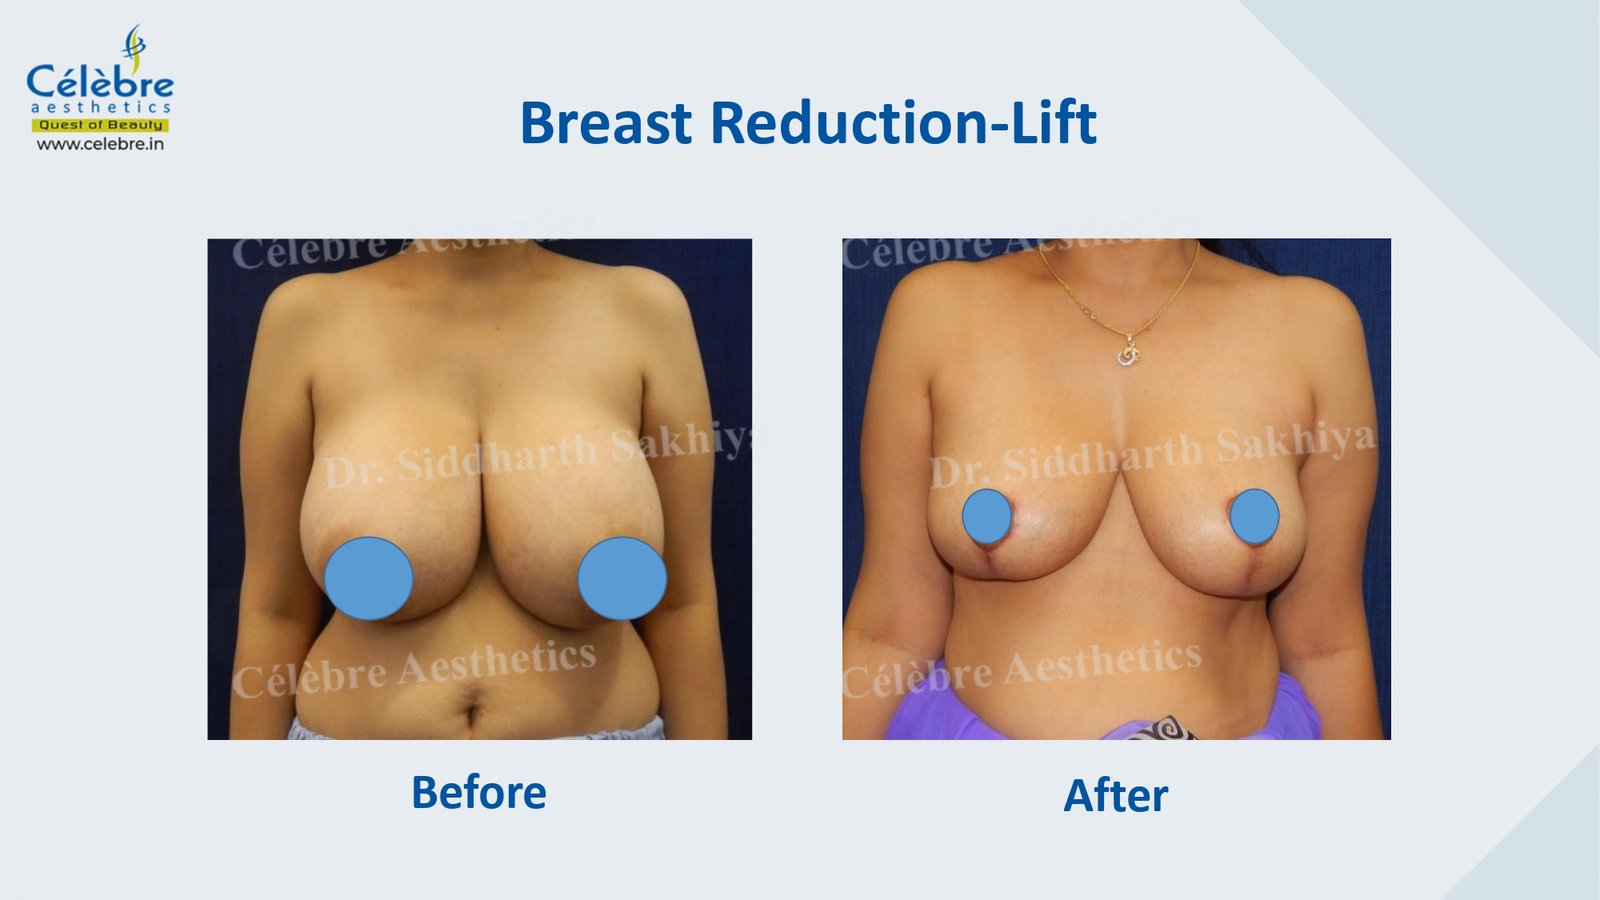 Best exercise after breast reduction surgery - Dr. Srikanth V 